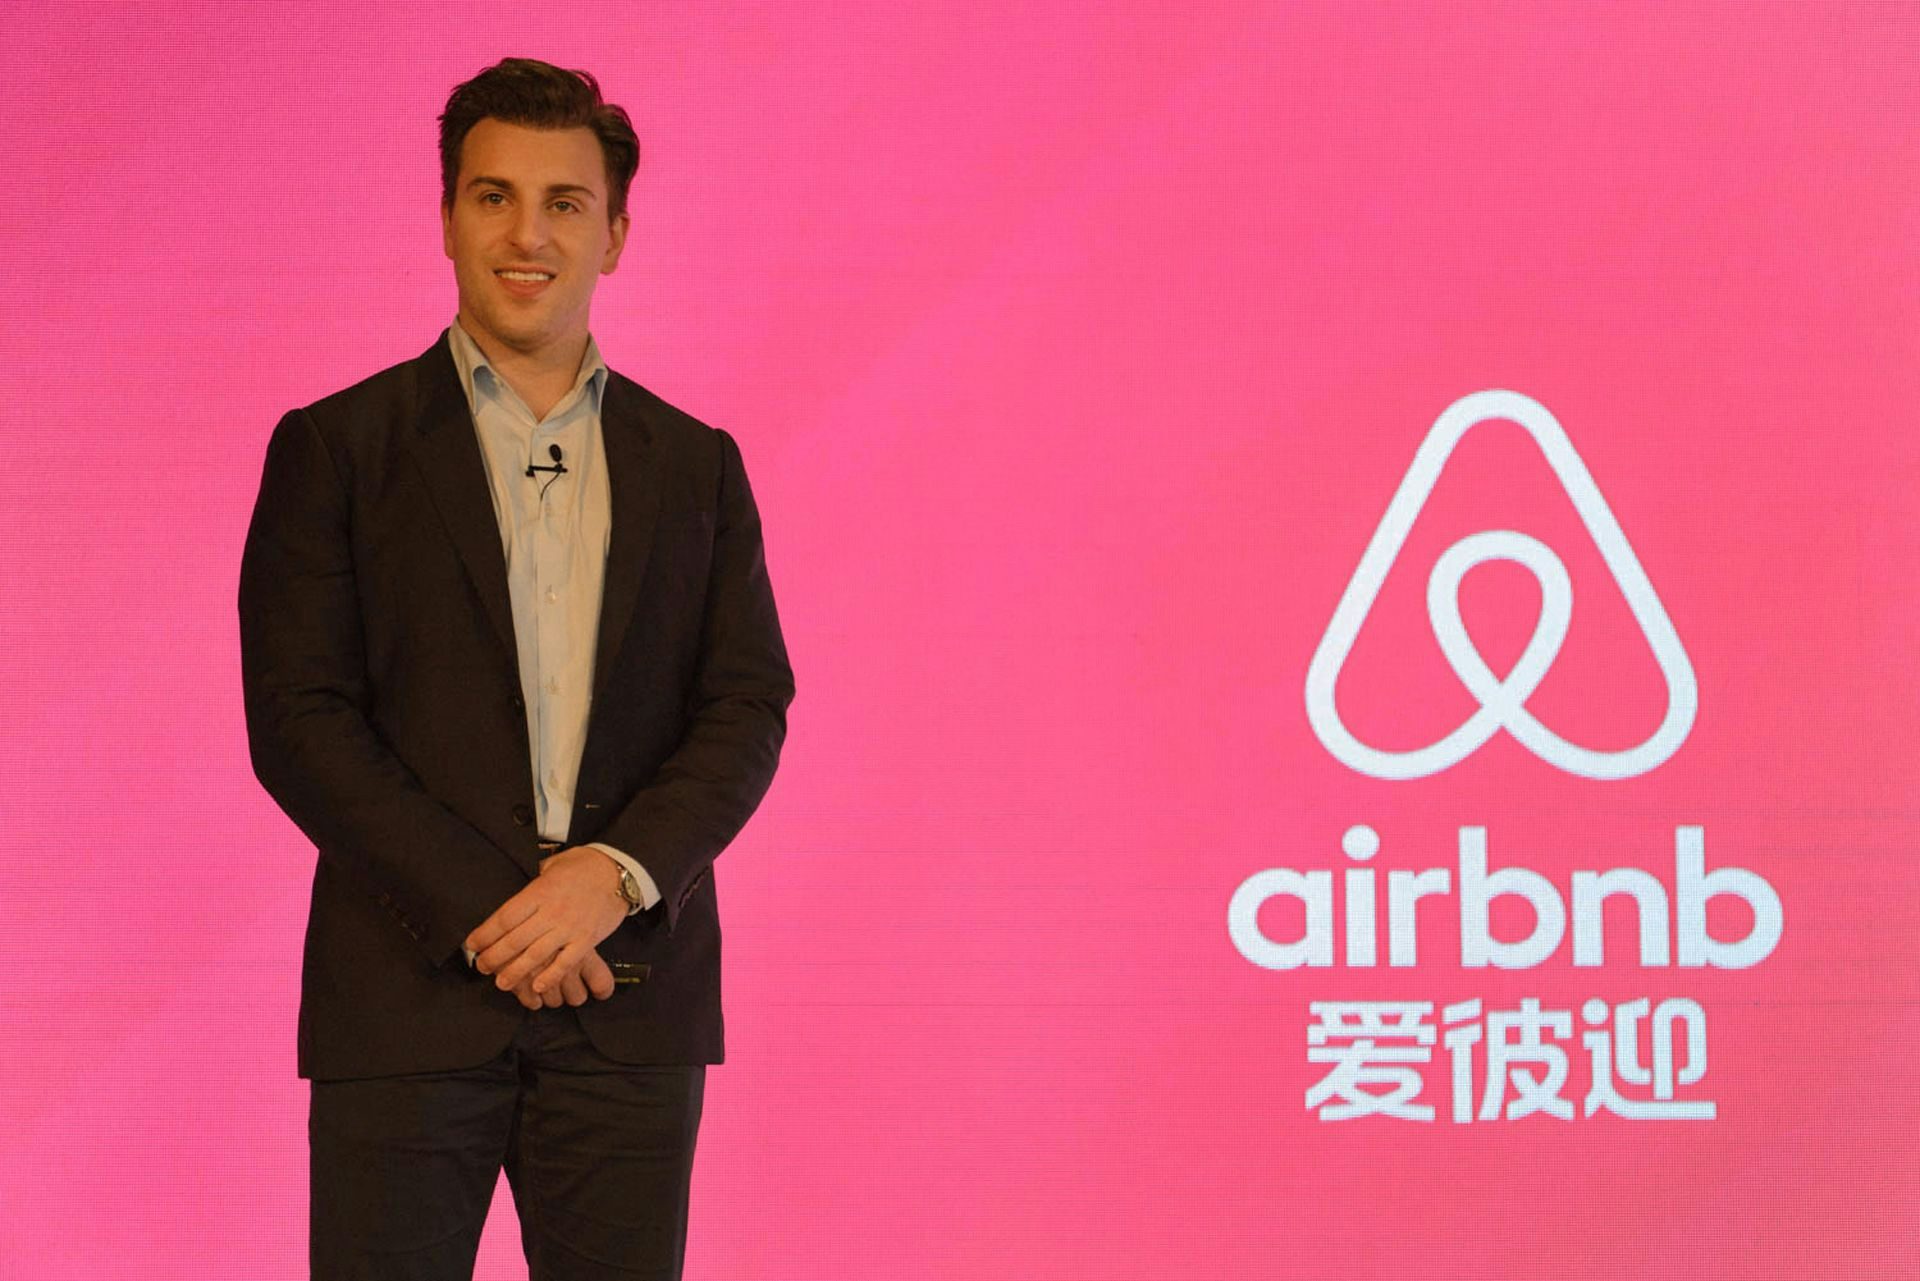 Airbnb Announces New Brand Name, Expansion in China